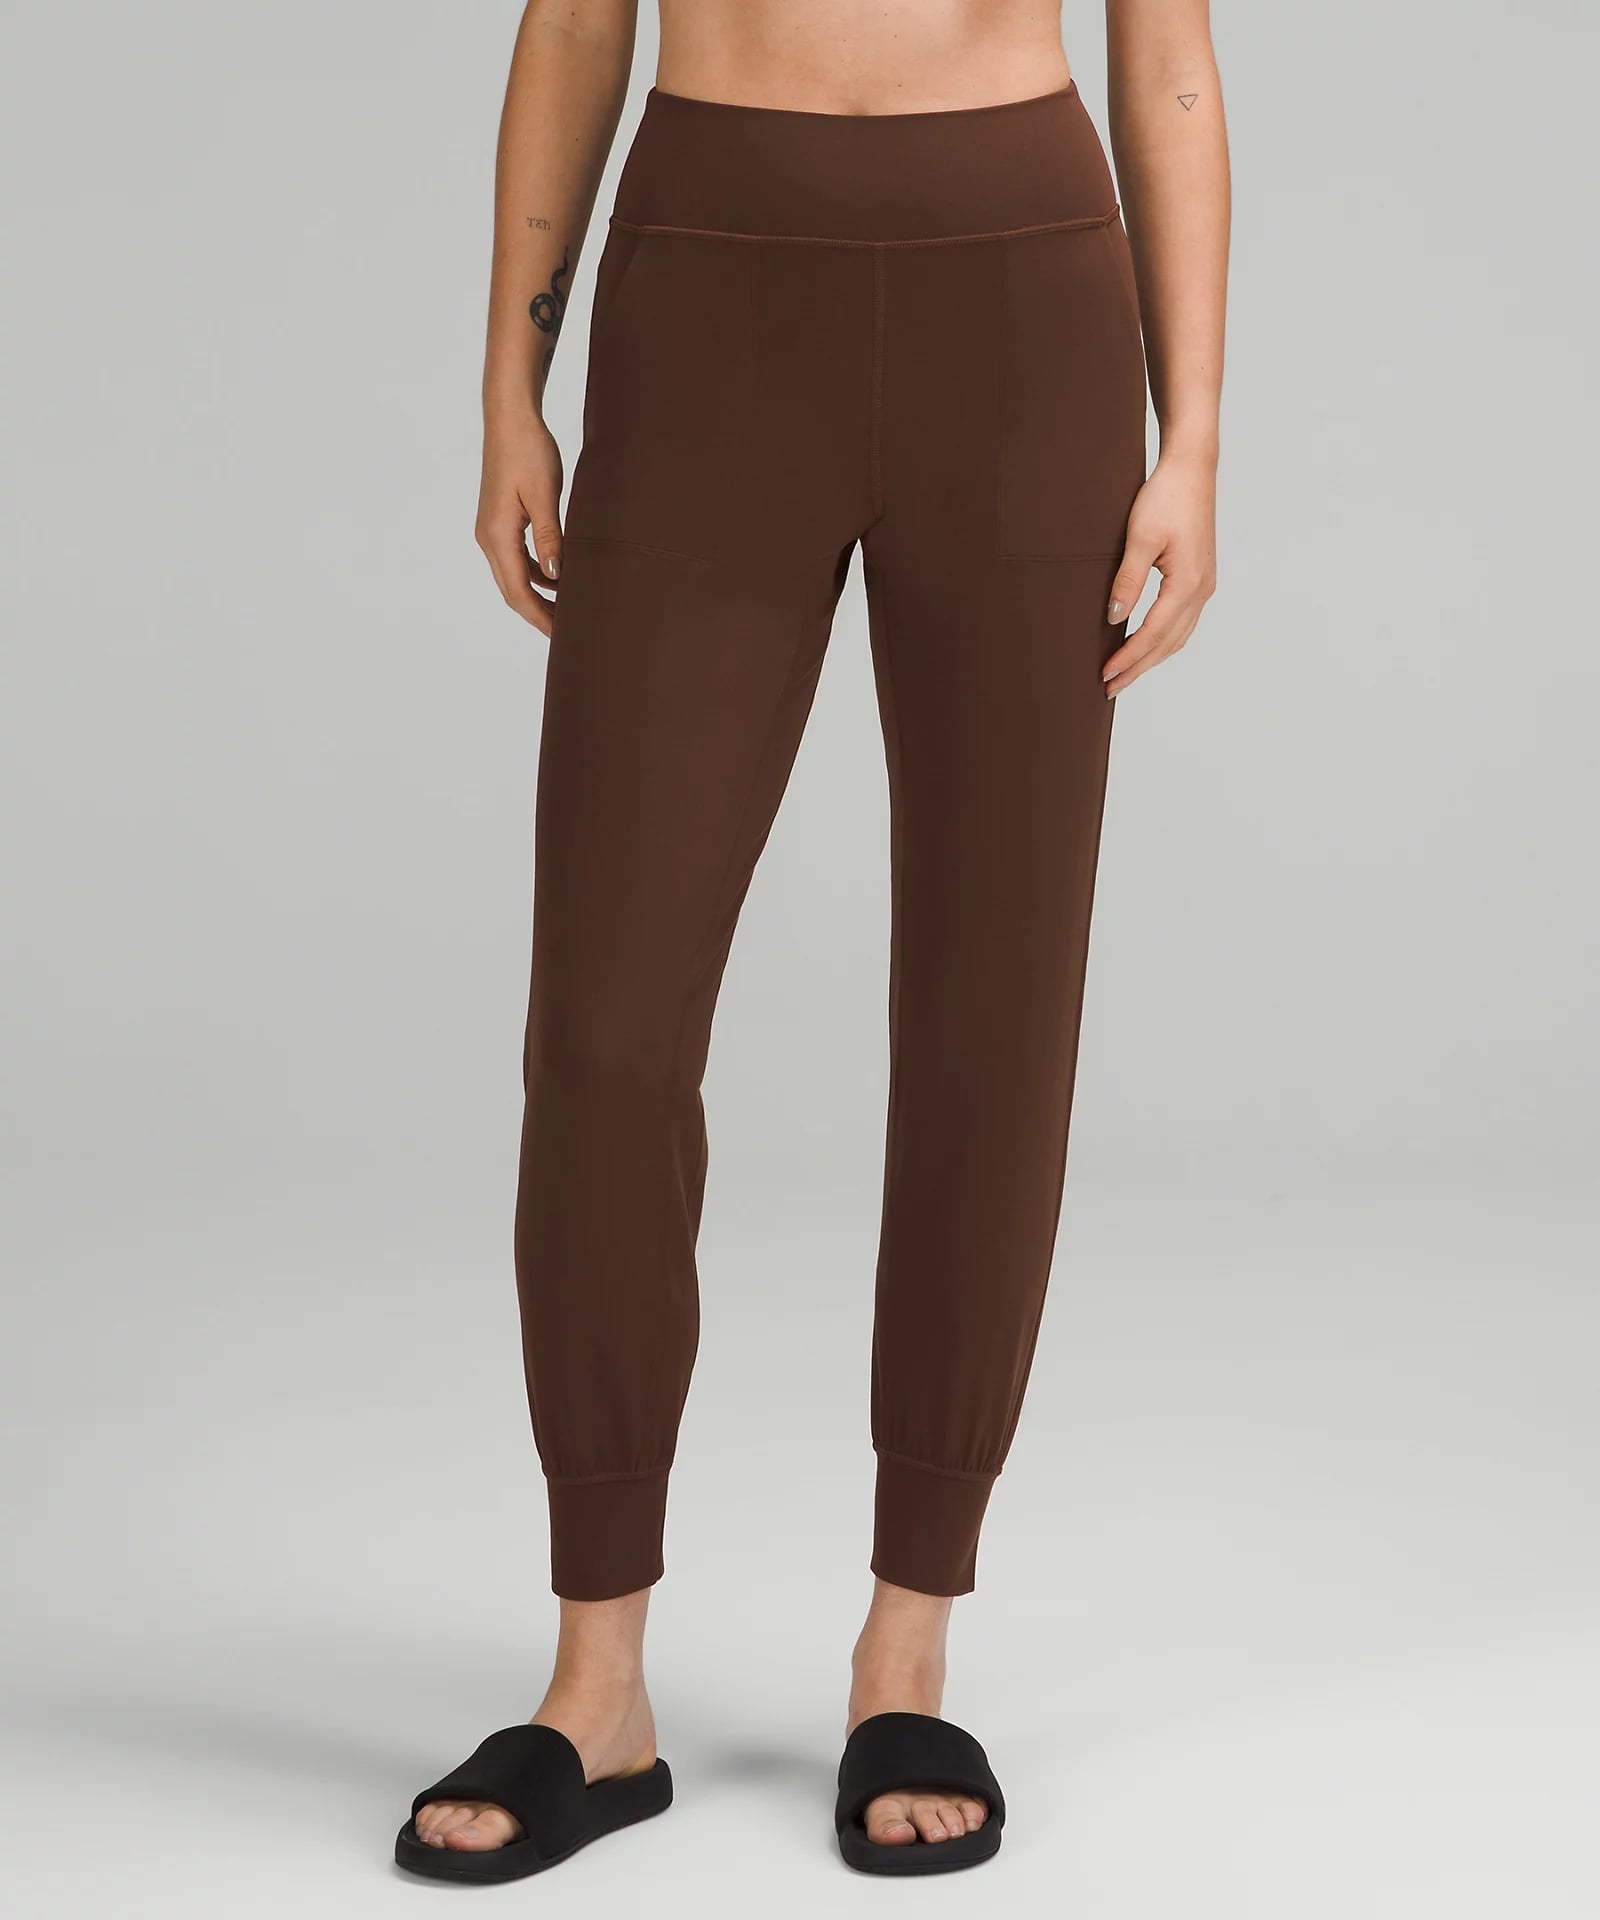 Best Joggers For Working Out: lululemon Align™ High-Rise Jogger